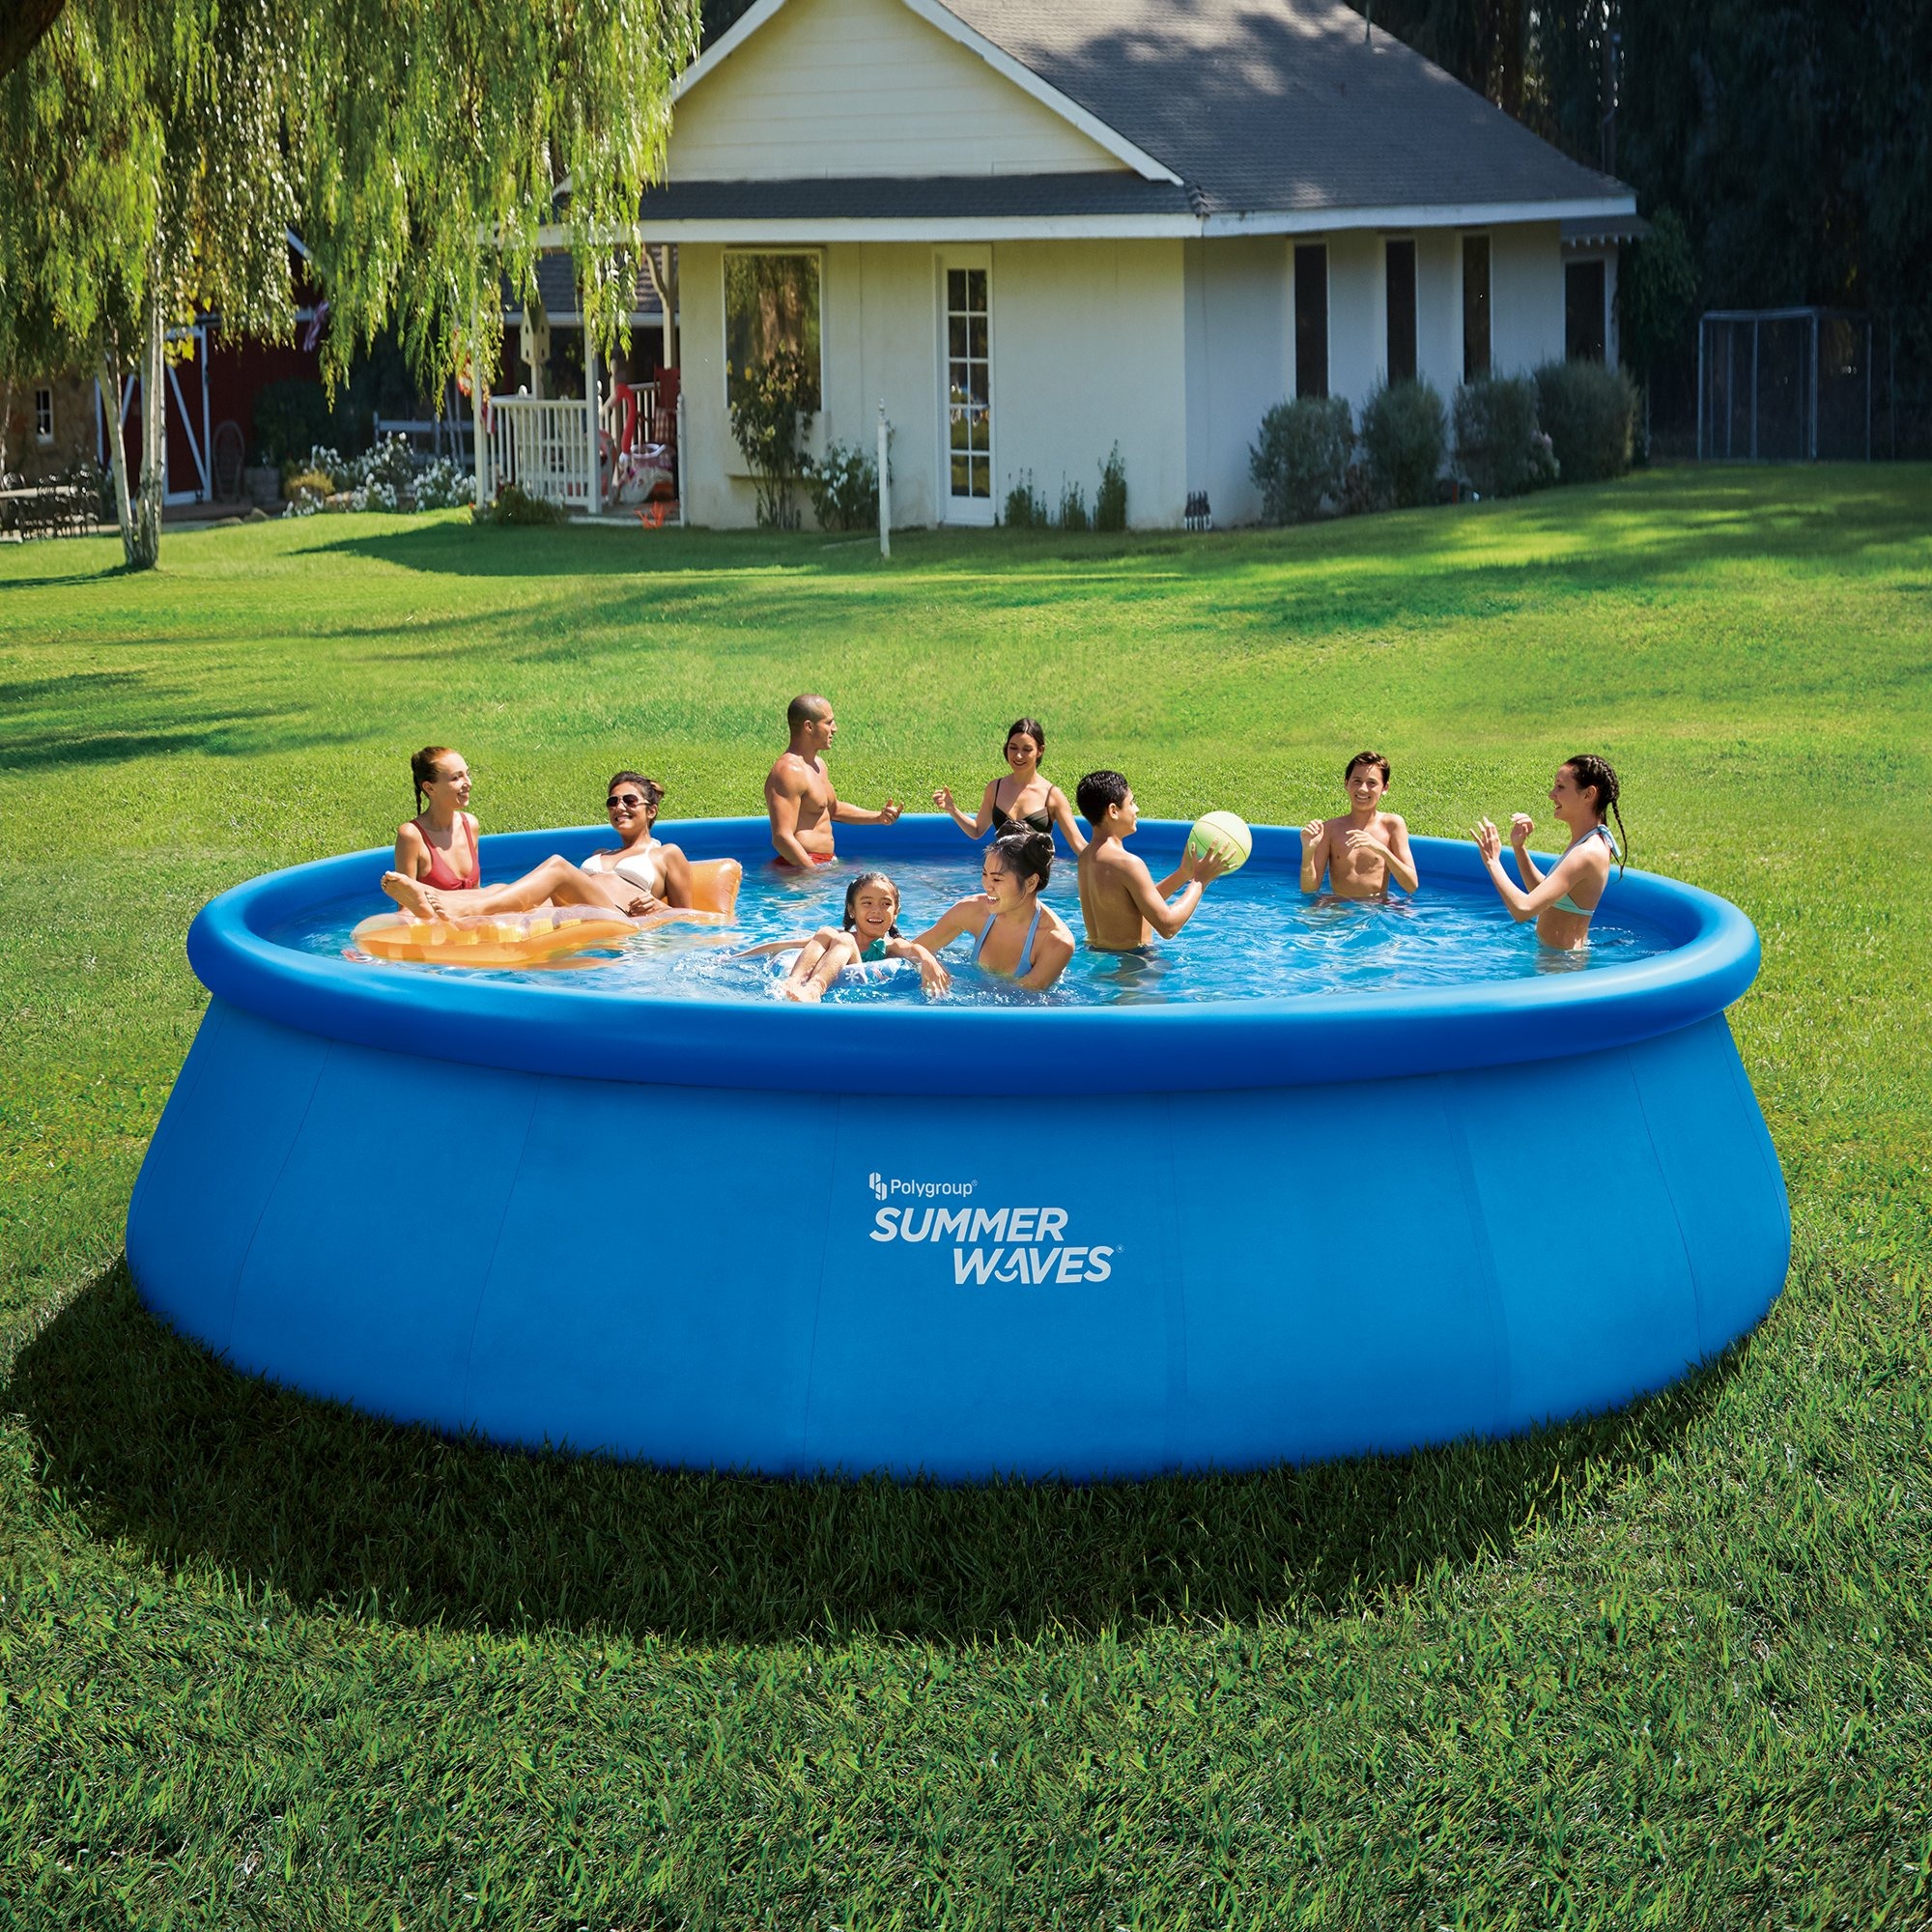 Summer Waves 18ft x 48in Inflatable Swimming pool SET on clearance for $268